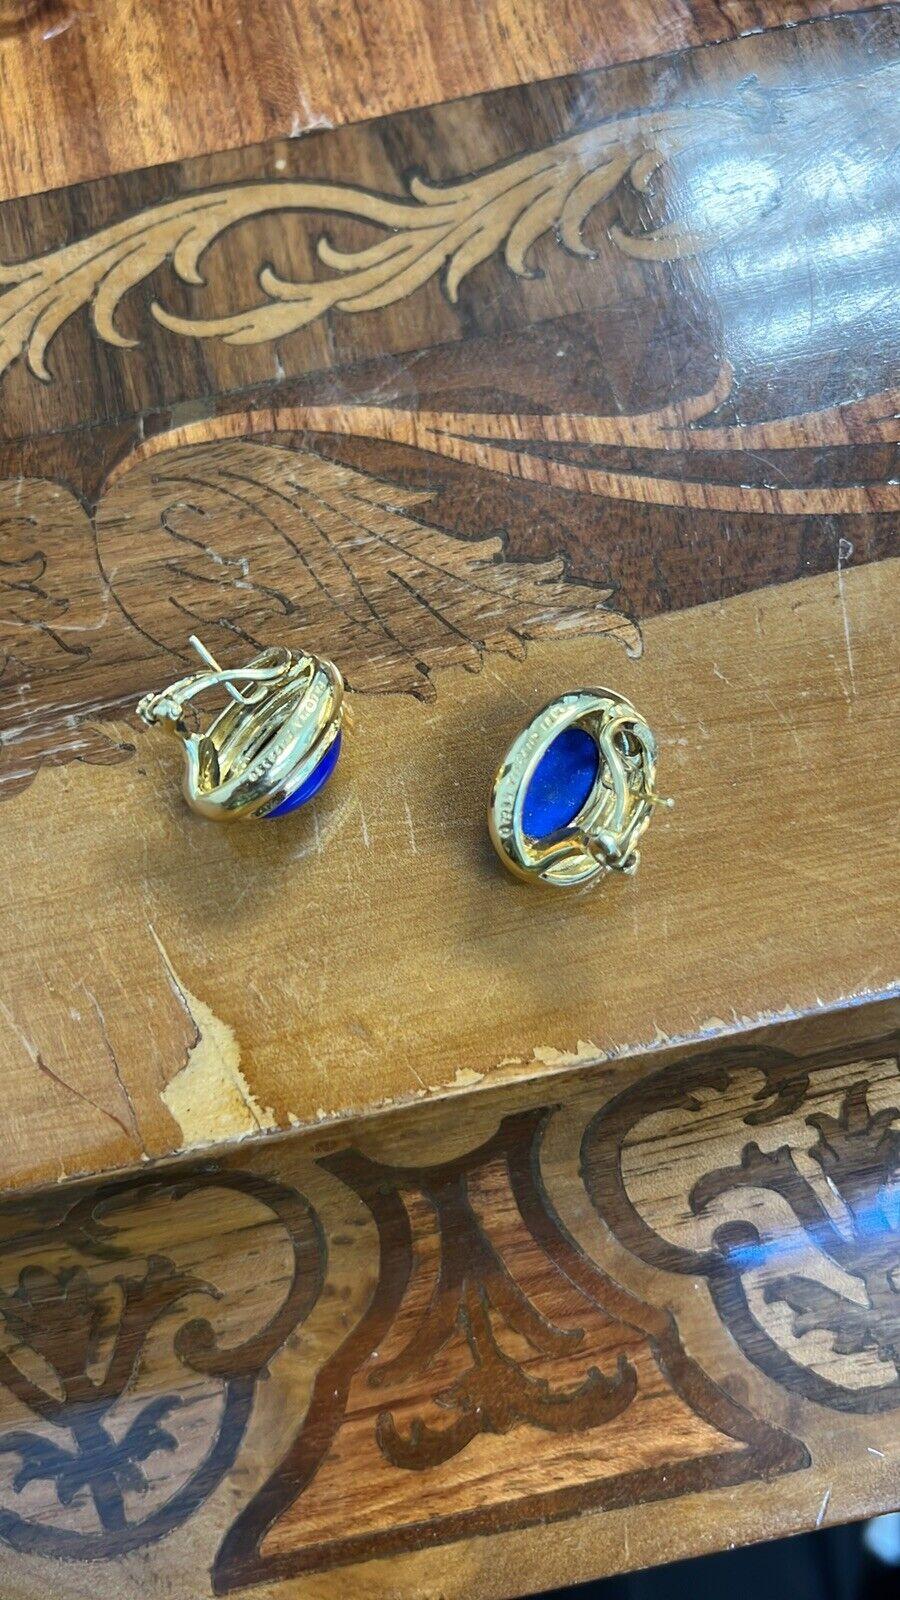 Tiffany & Co. Paloma Picasso 18k Yellow Gold & Lapis Lazuli Earrings Circa 1988

Here is your chance to purchase a beautiful and highly collectible designer pair of earrings.  

Tiffany & Co. Paloma Picasso 18k Yellow Gold & Lapis Lazuli Button